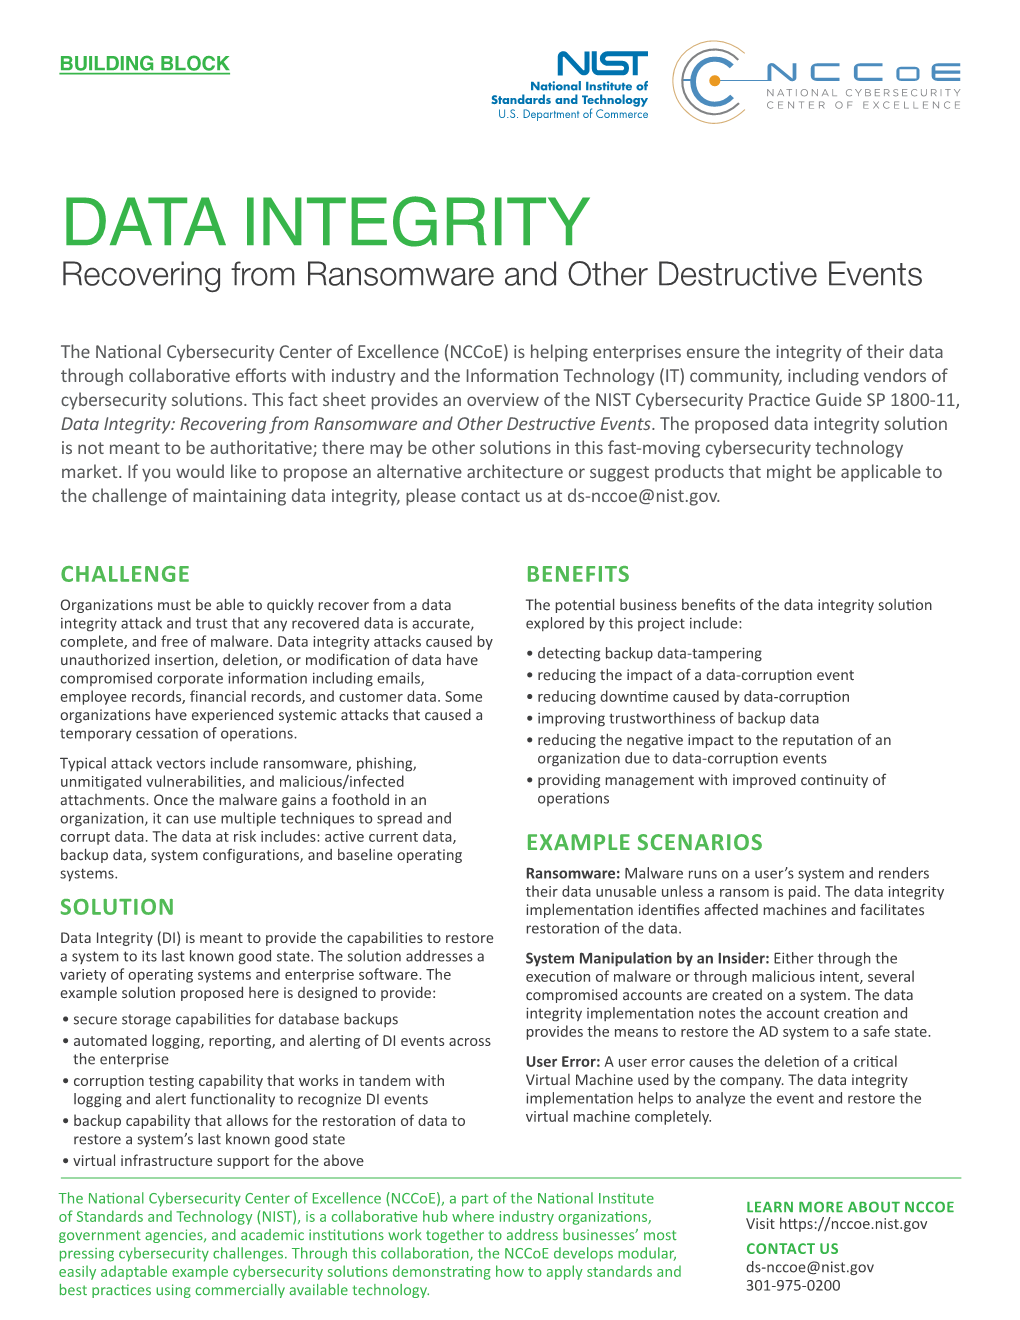 Data Integrity: Recovering from Ransomware and Other Destructive Events